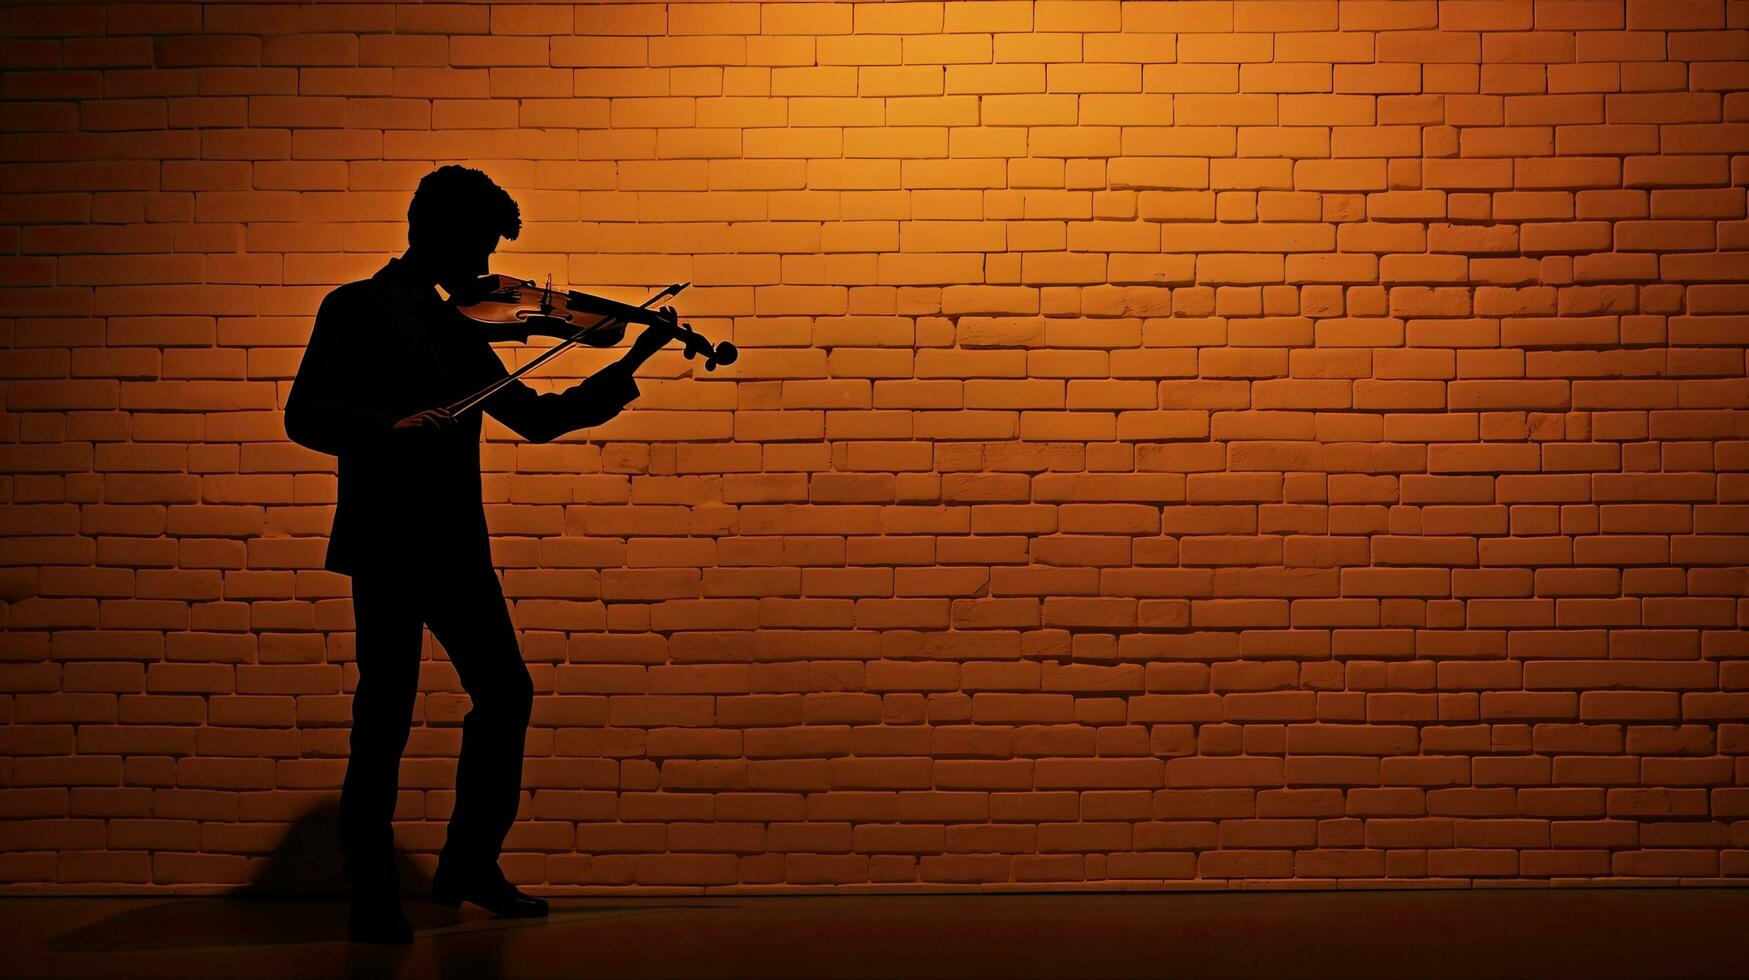 Brick wall backdrop for violinist s silhouette photo